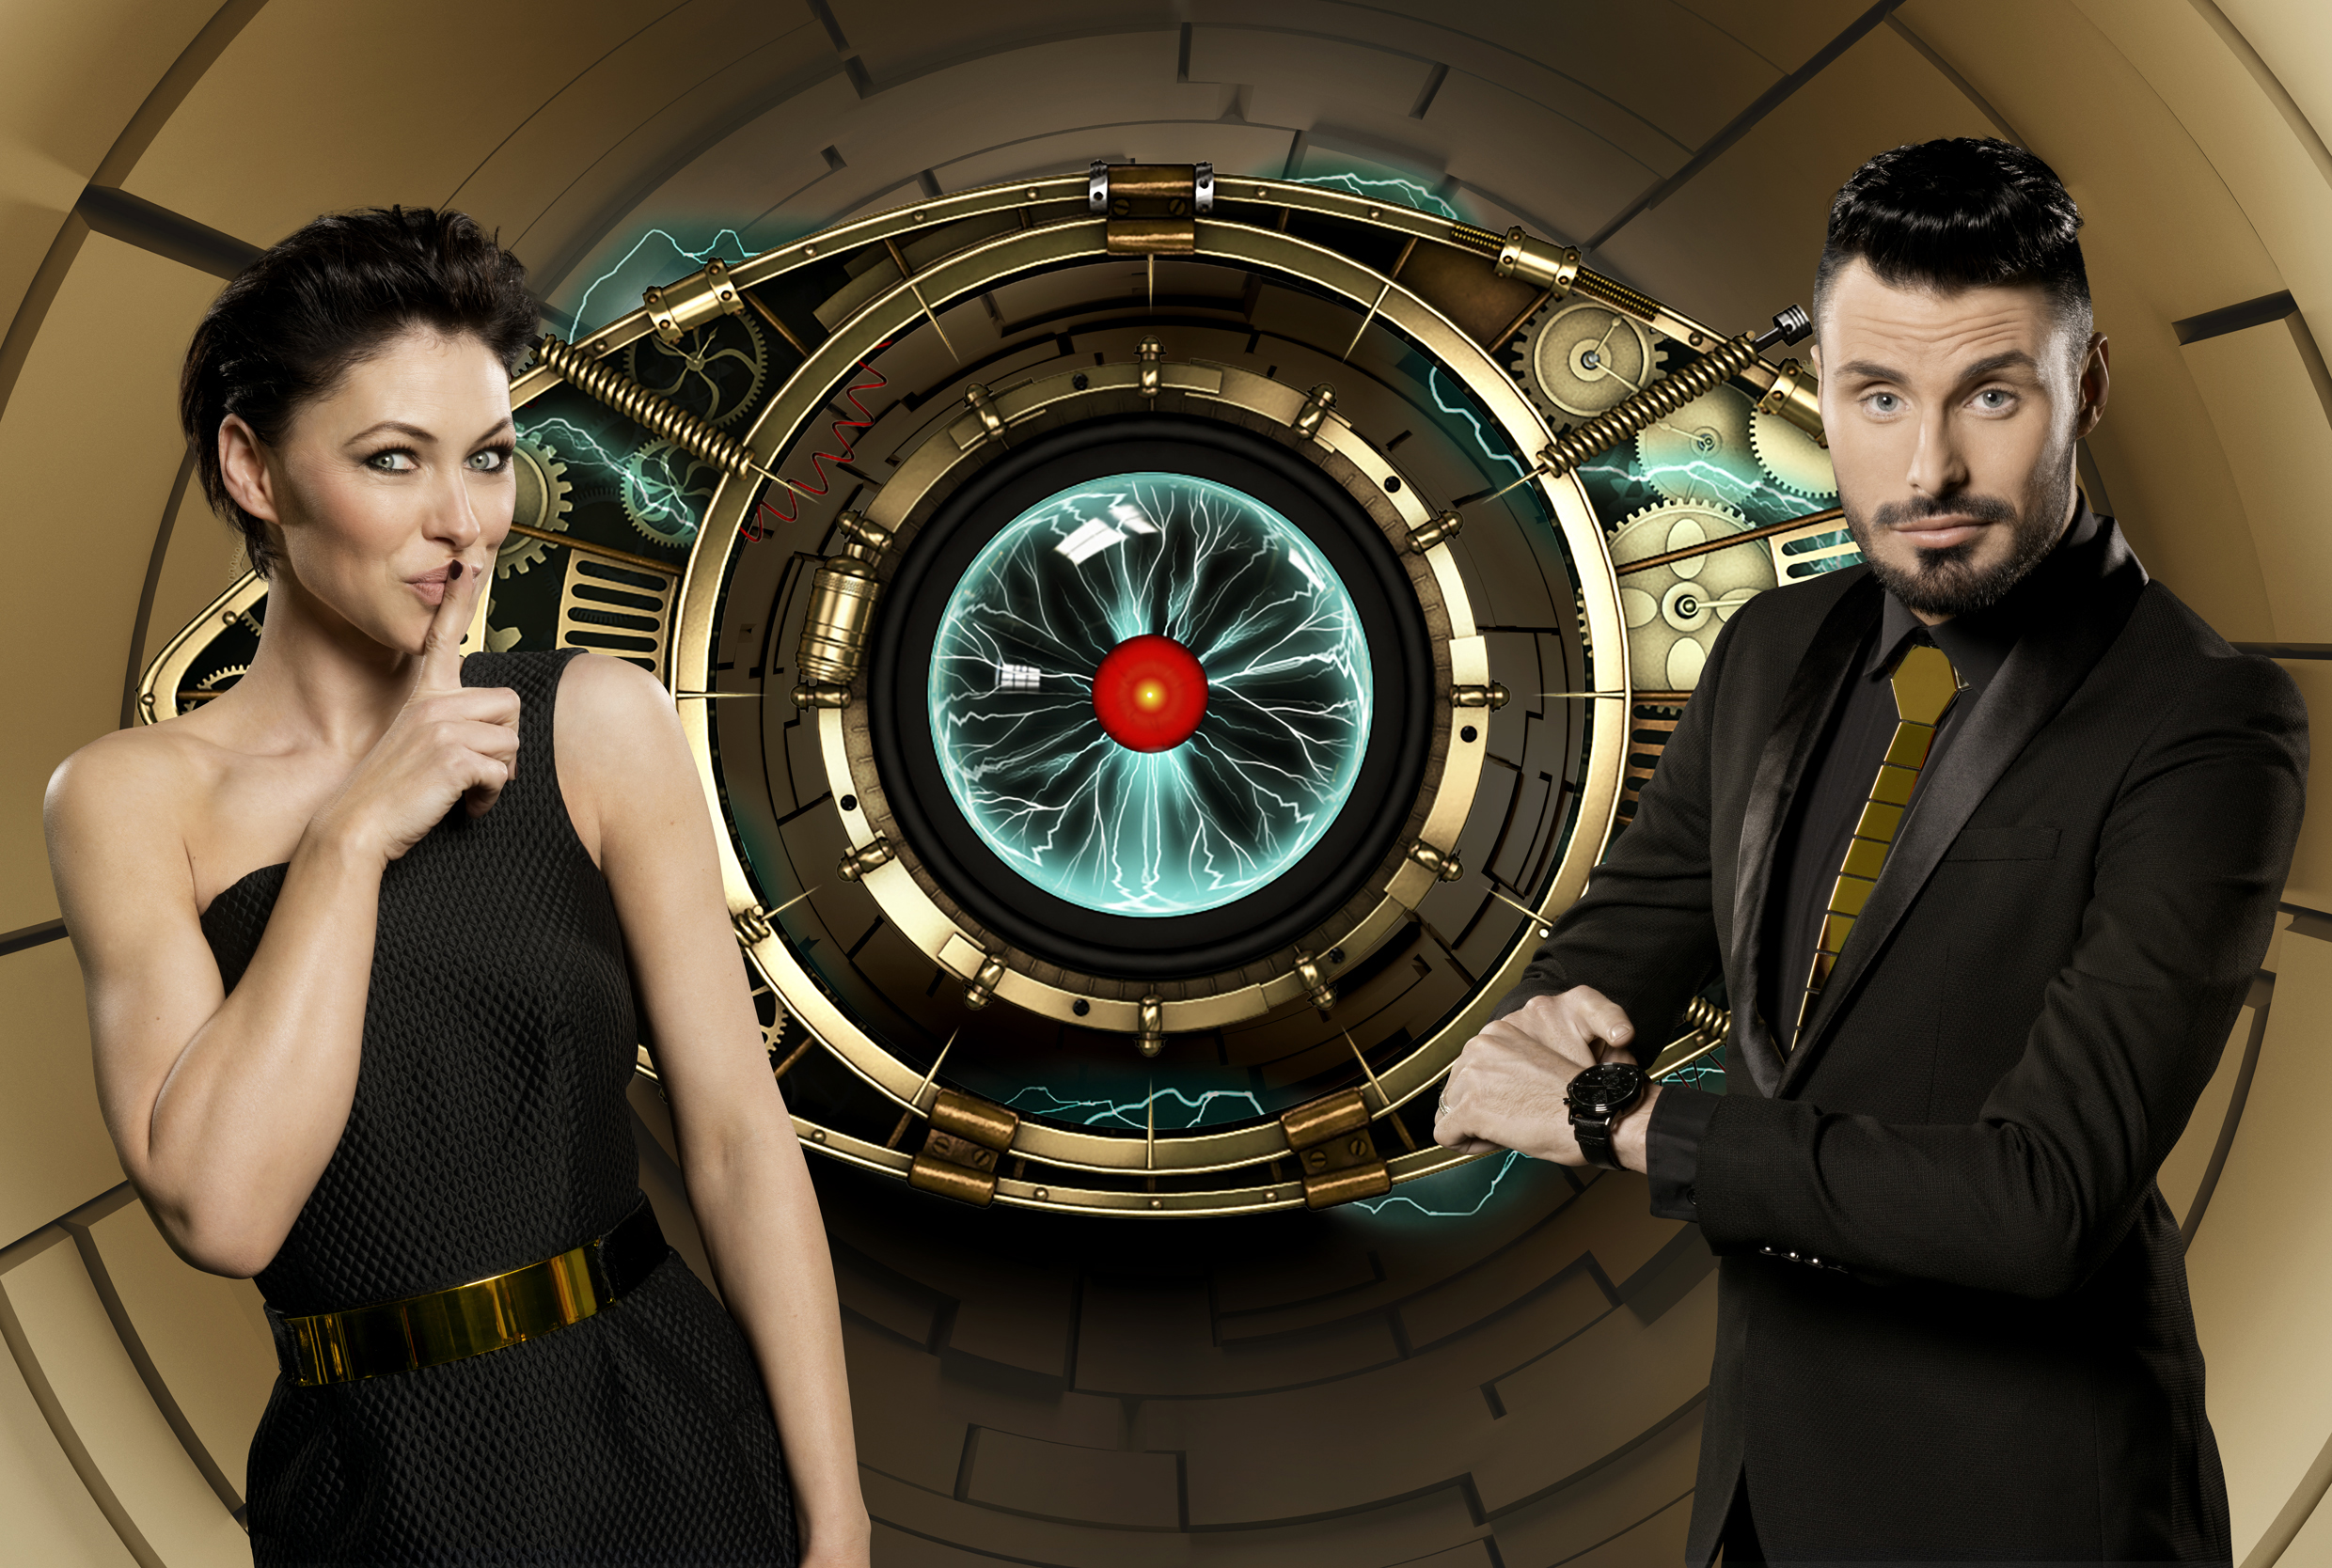 Pre-BB: C5 reveal Emma and Rylan promo shots ahead of new series